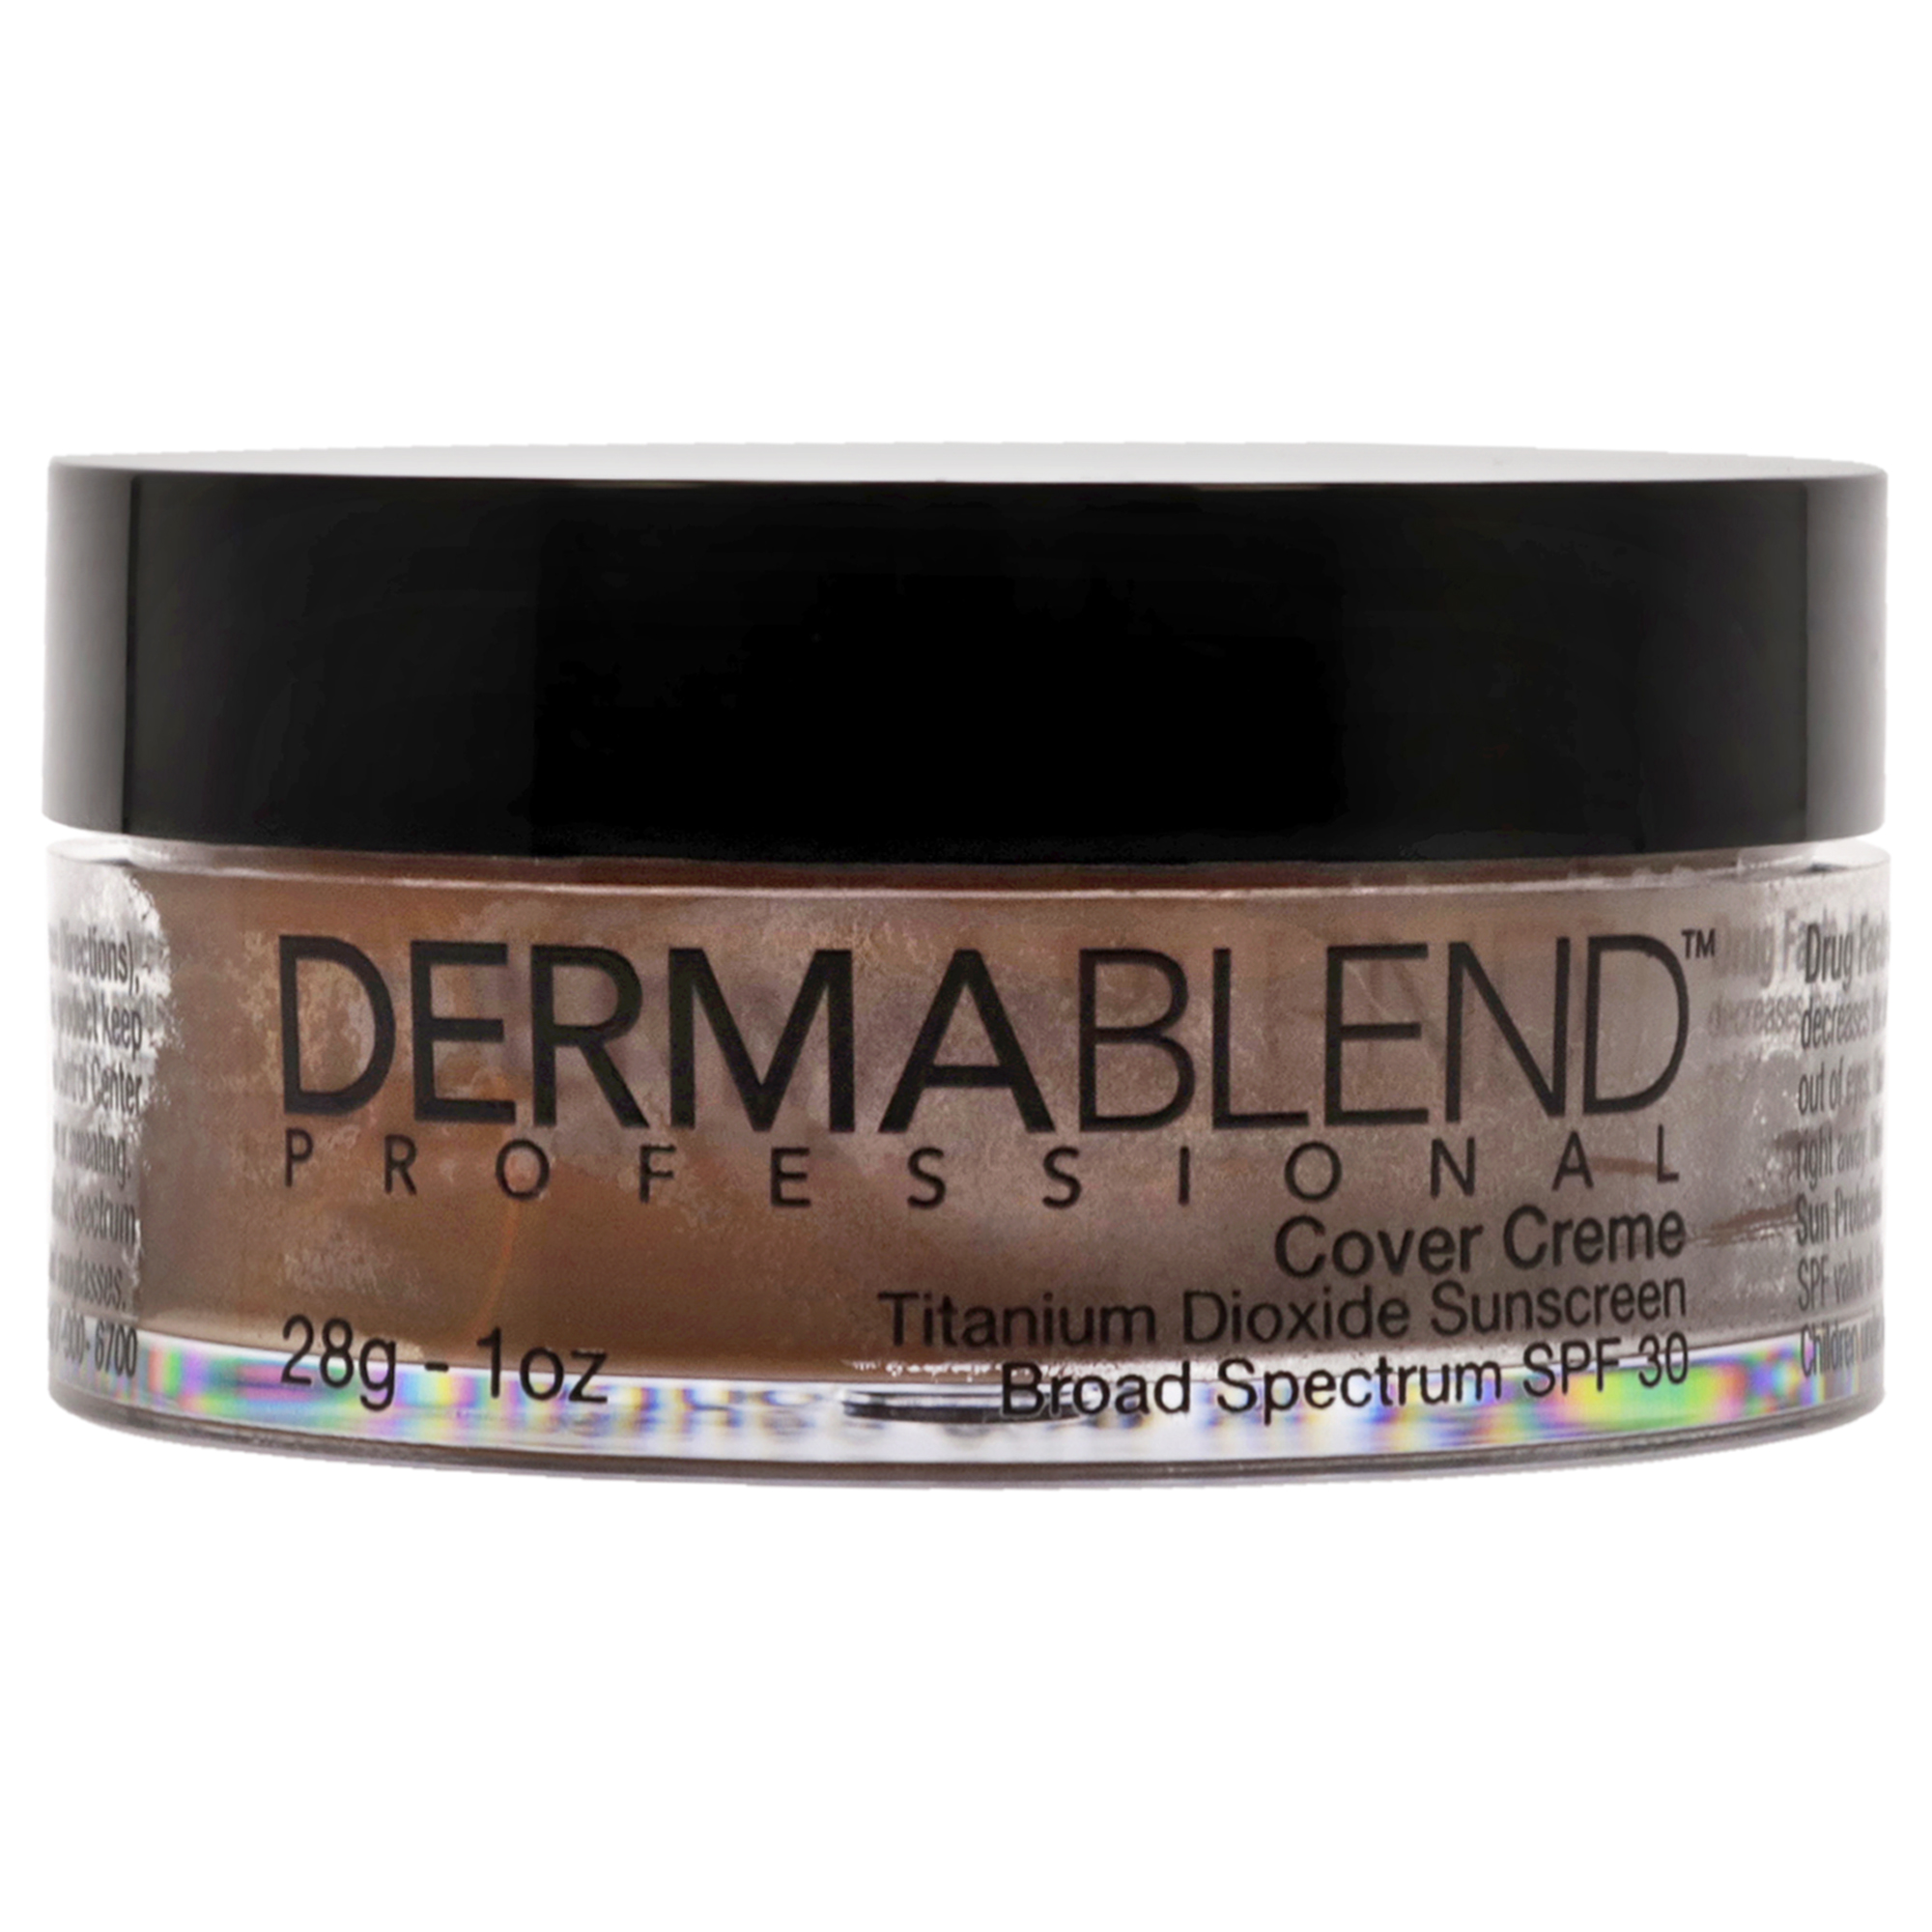 Dermablend Cover Creme High Color Coverage SPF 30 - 90N Deep Brown , 1 oz Foundation - image 2 of 6